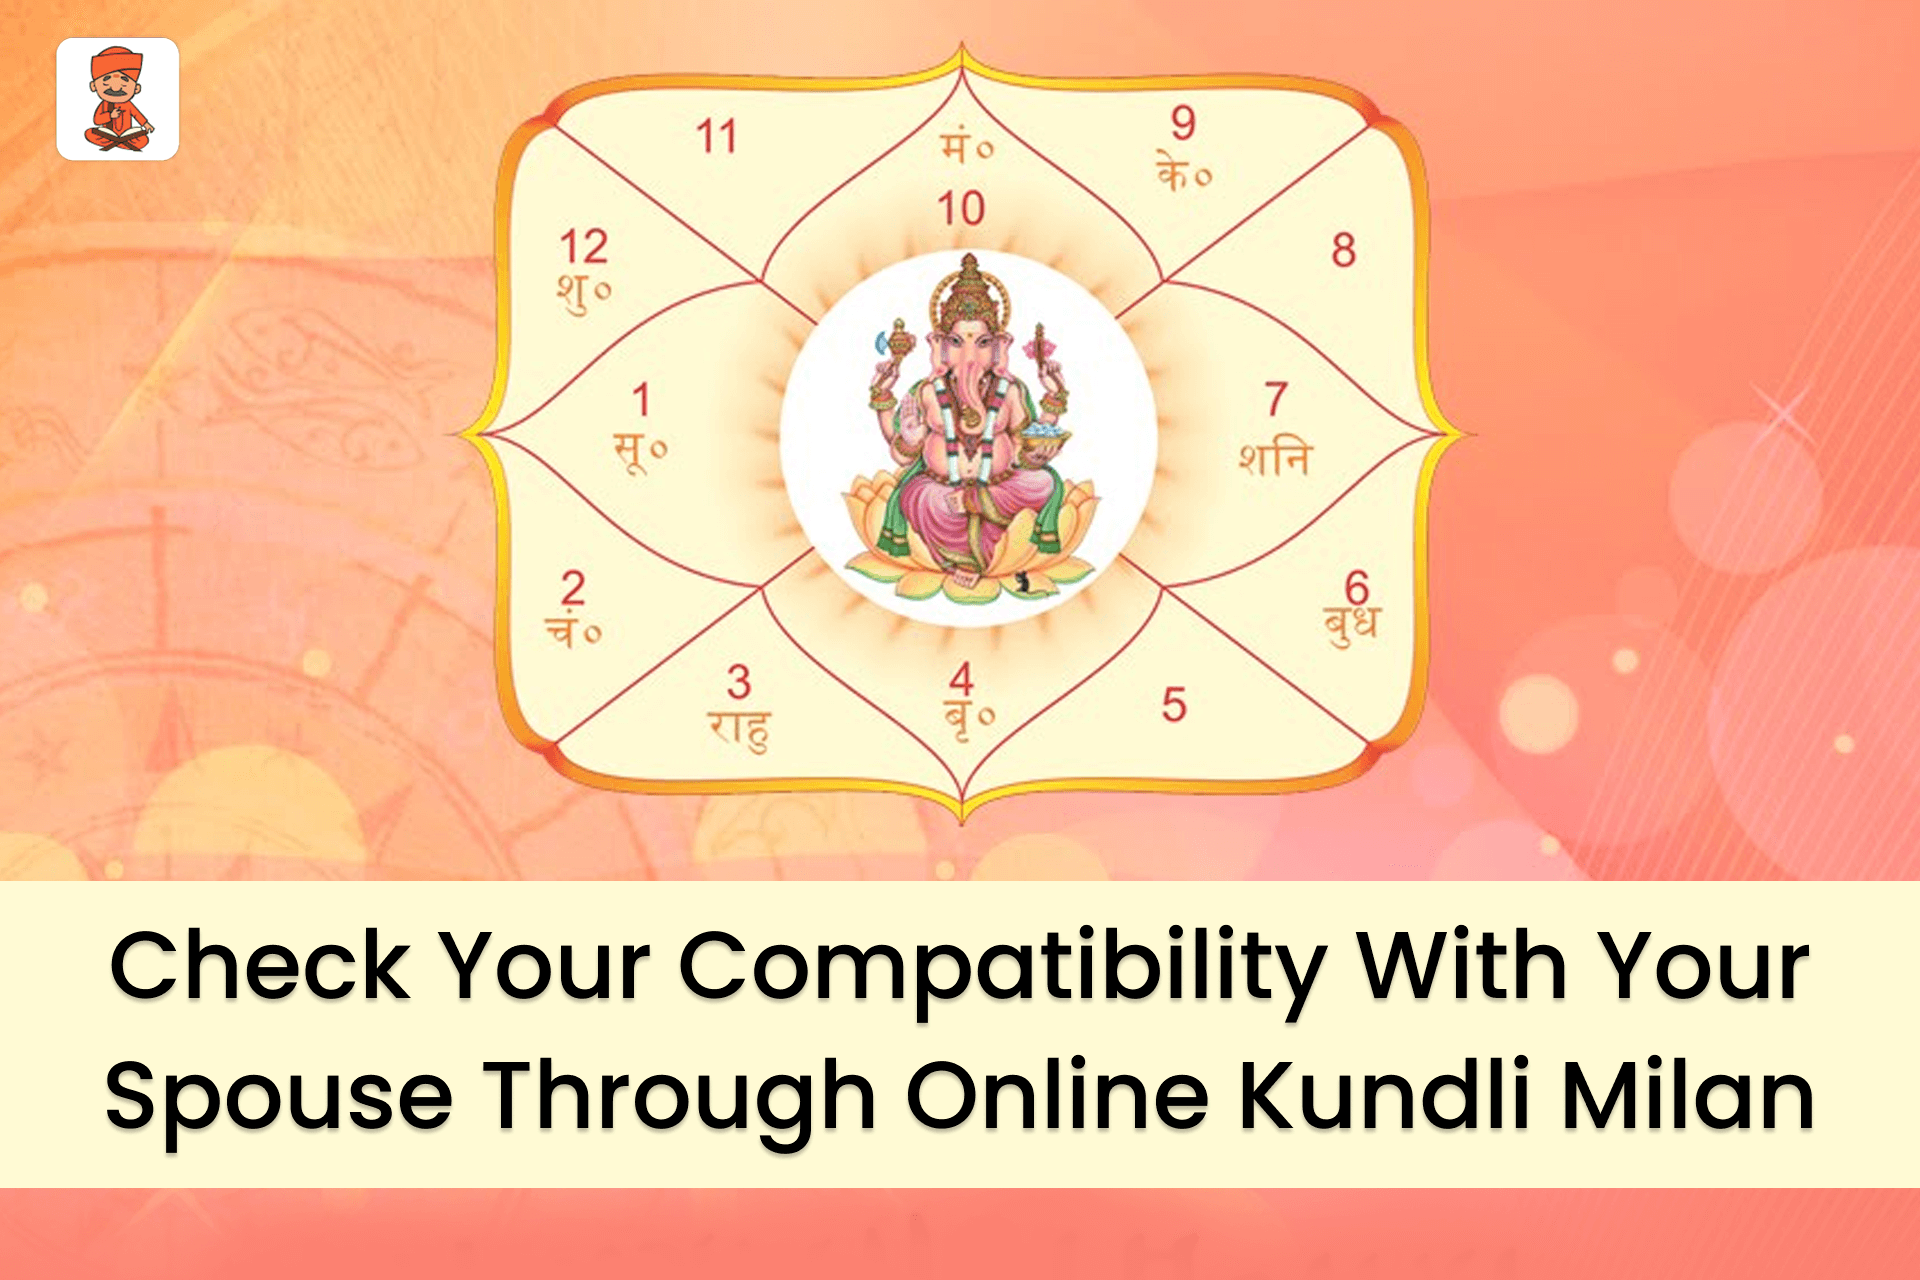 Check Your Compatibility With Your Spouse Through Online Kundali Milan